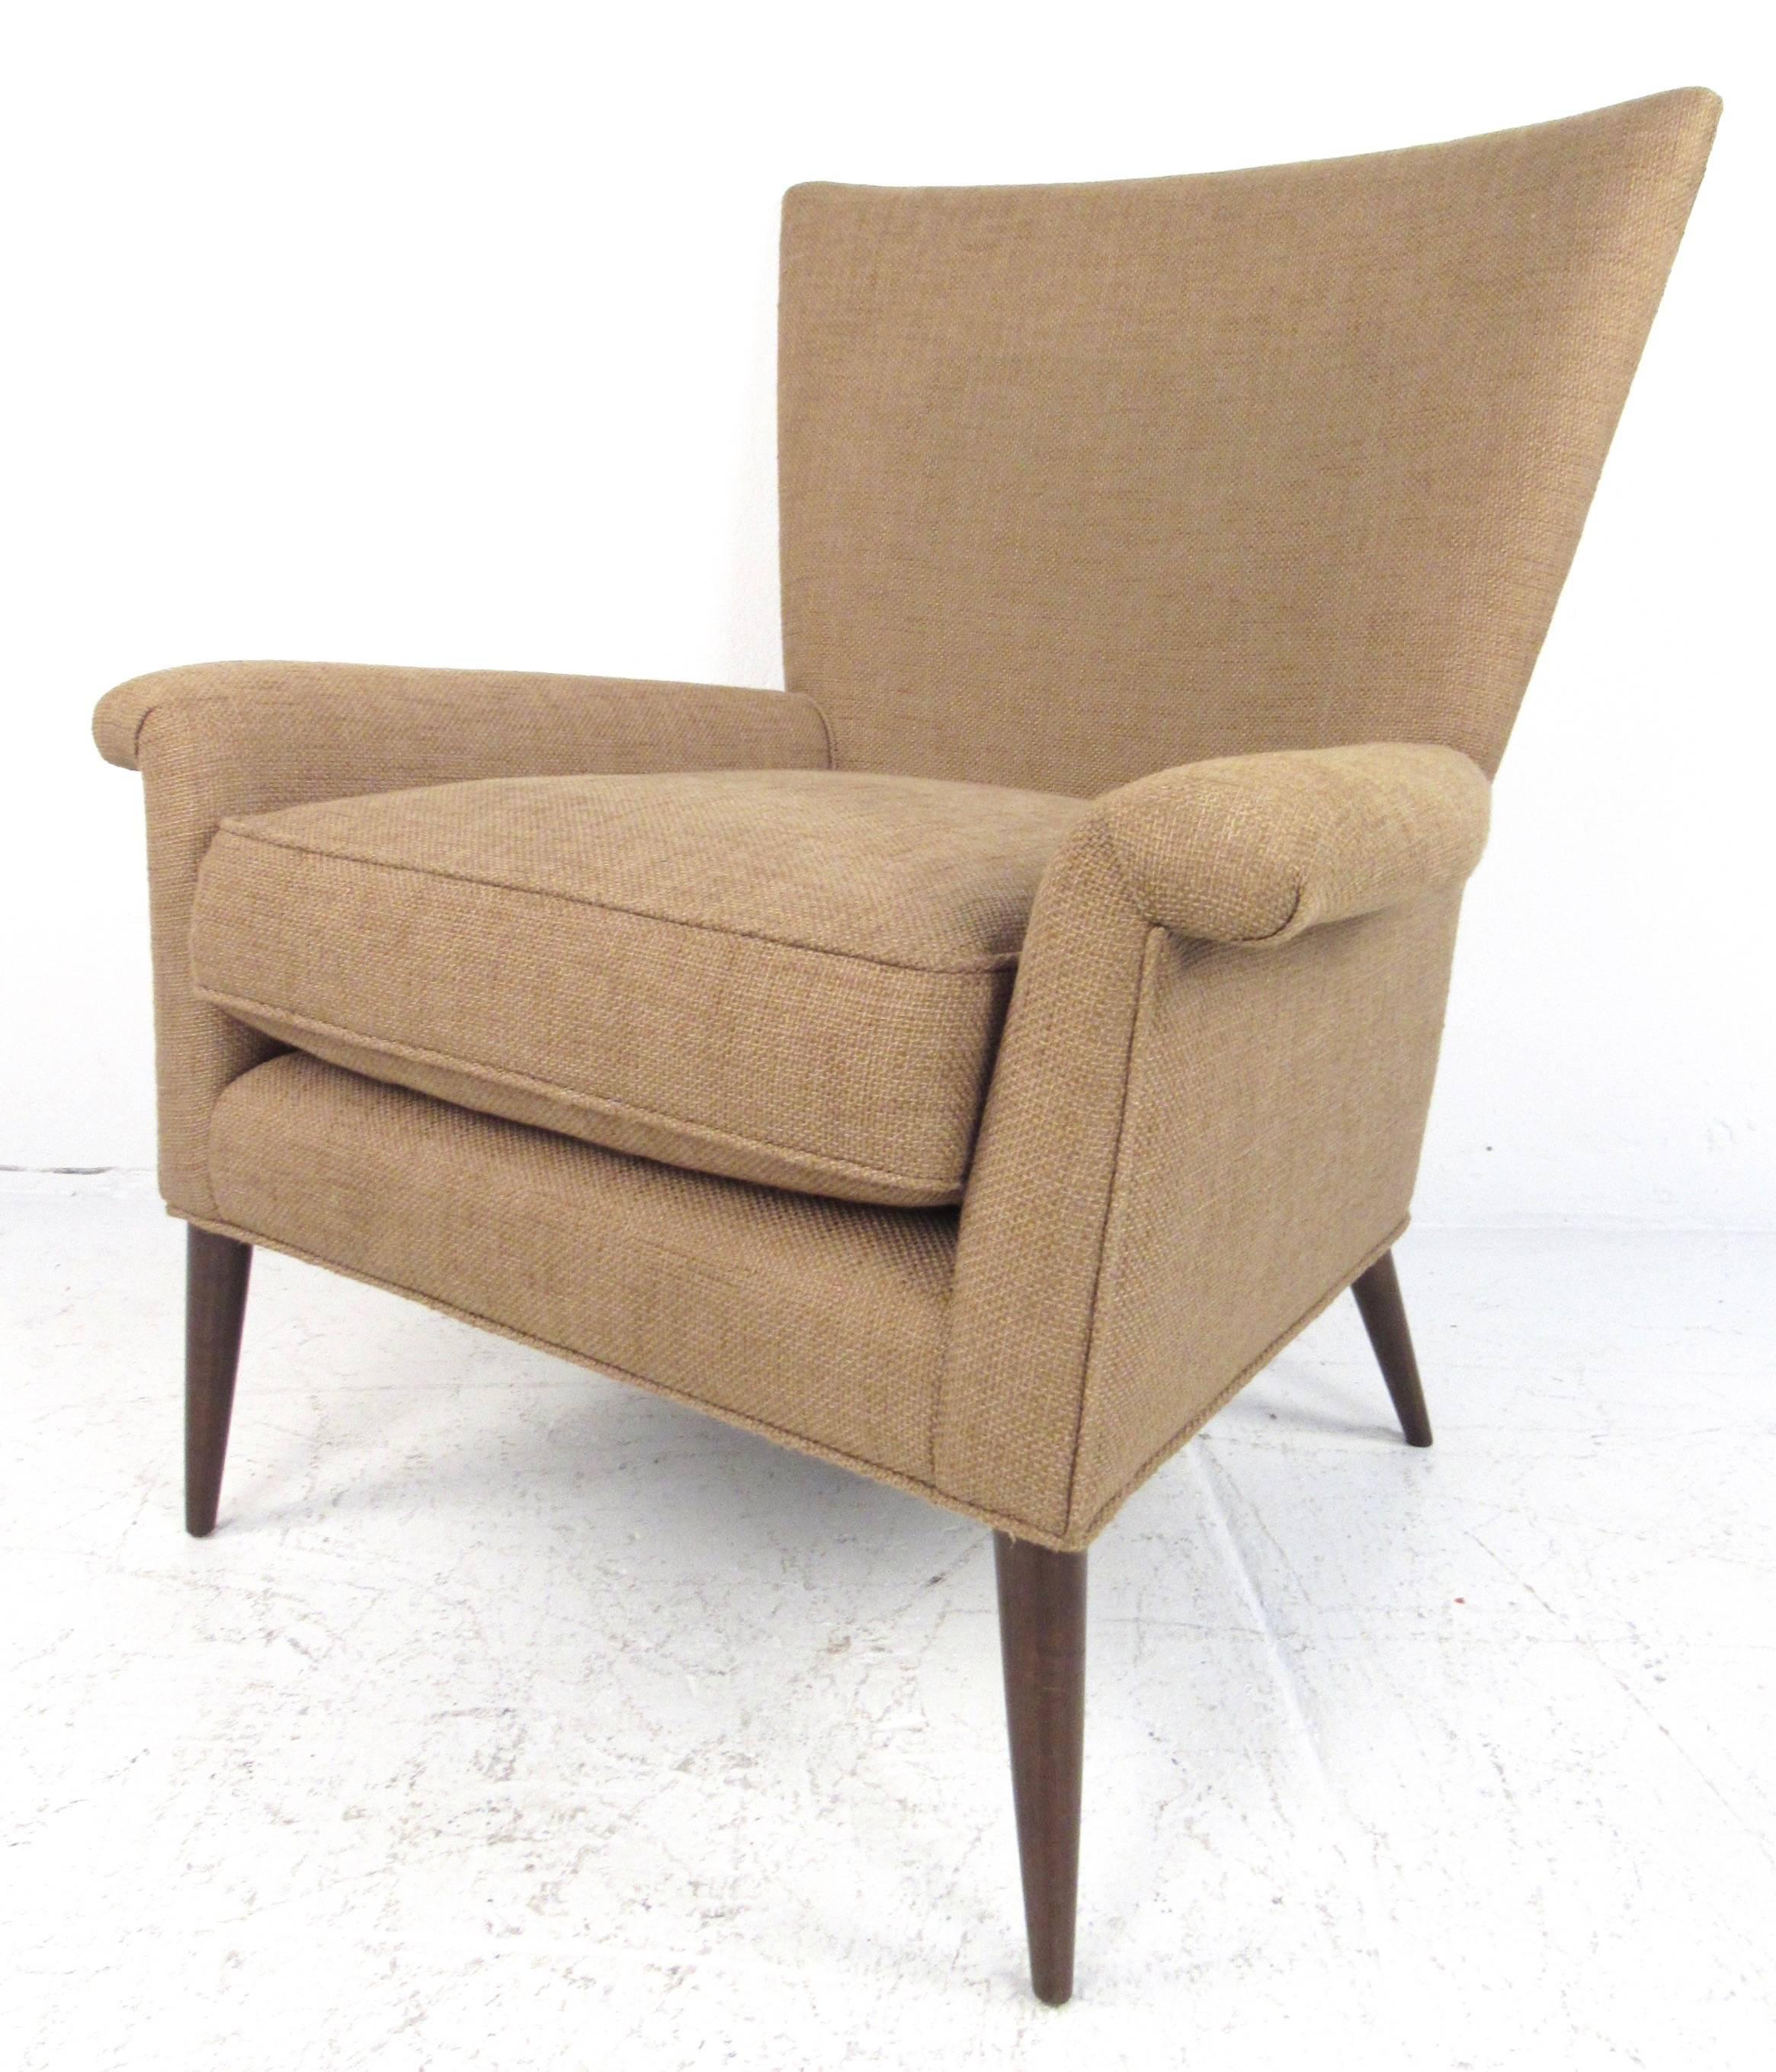 This vintage modern wingback lounge chair boasts an elegant high back design with slender tapered legs and plush upholstered seating. Optional back pillow and sculpted armrests enhance optimal comfort. Please confirm item location (NY or NJ).